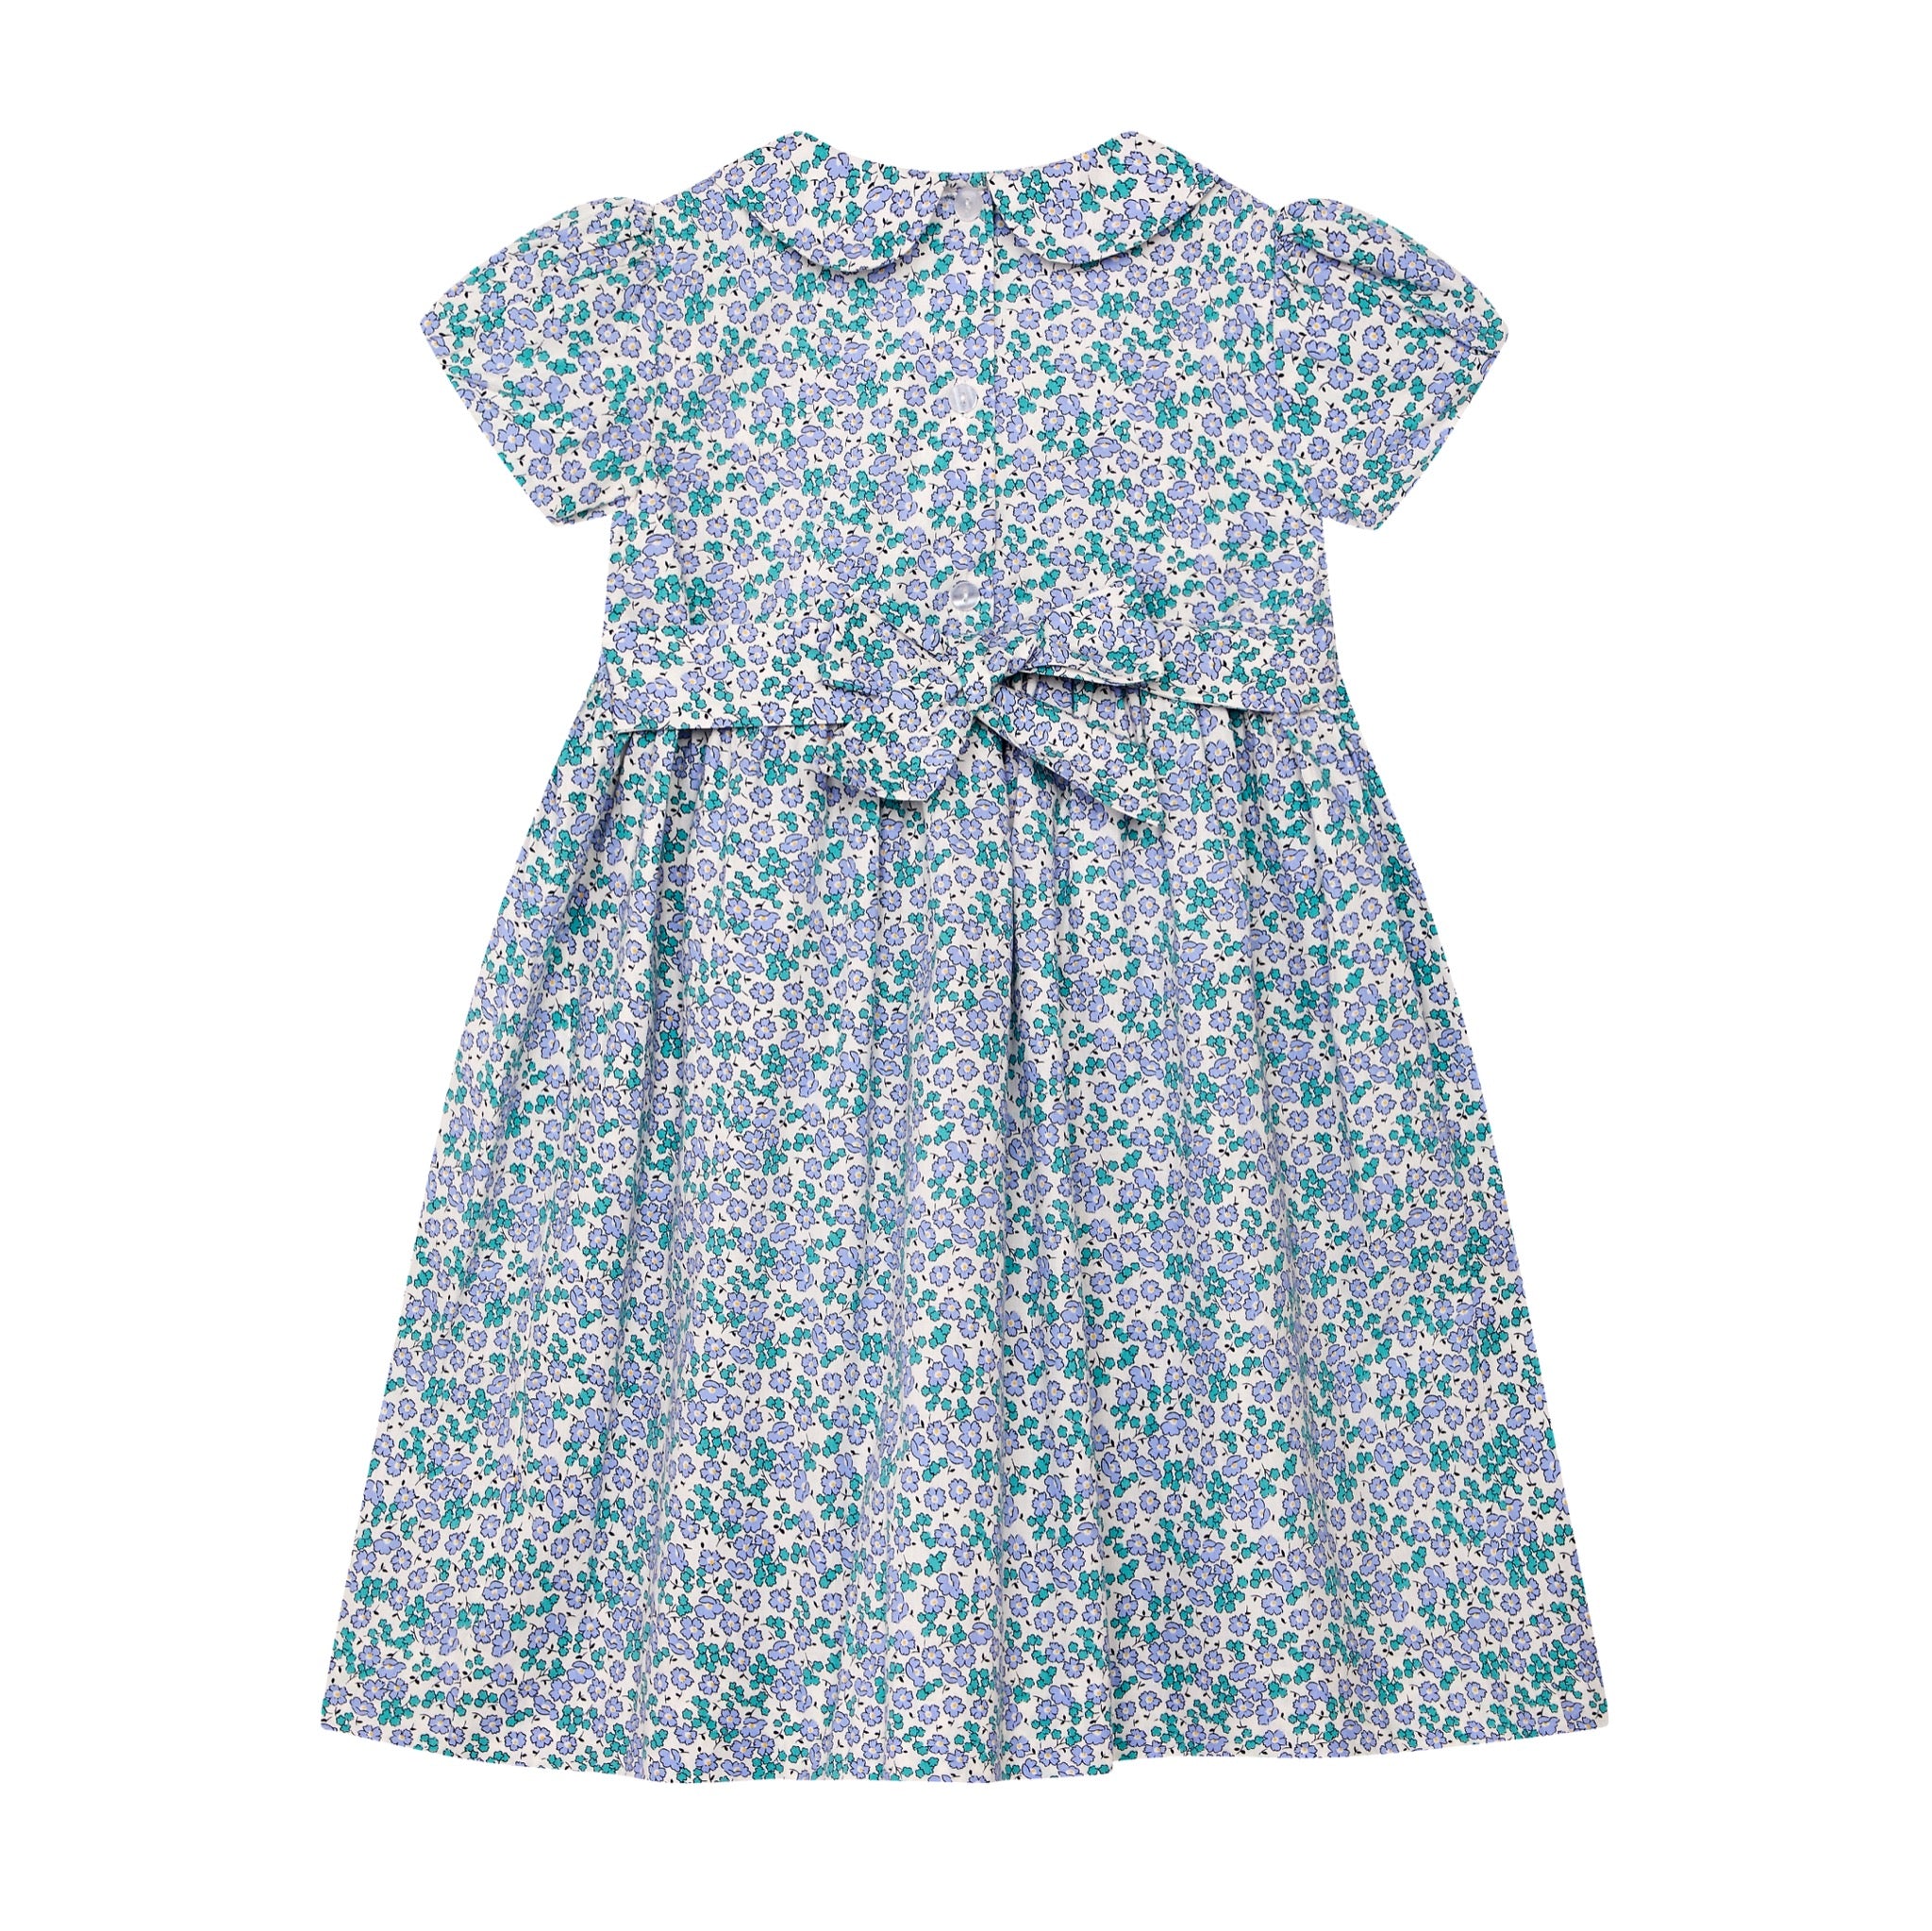 lilac blossom - Floral hand-smocked girls dress made from 100% cotton, back